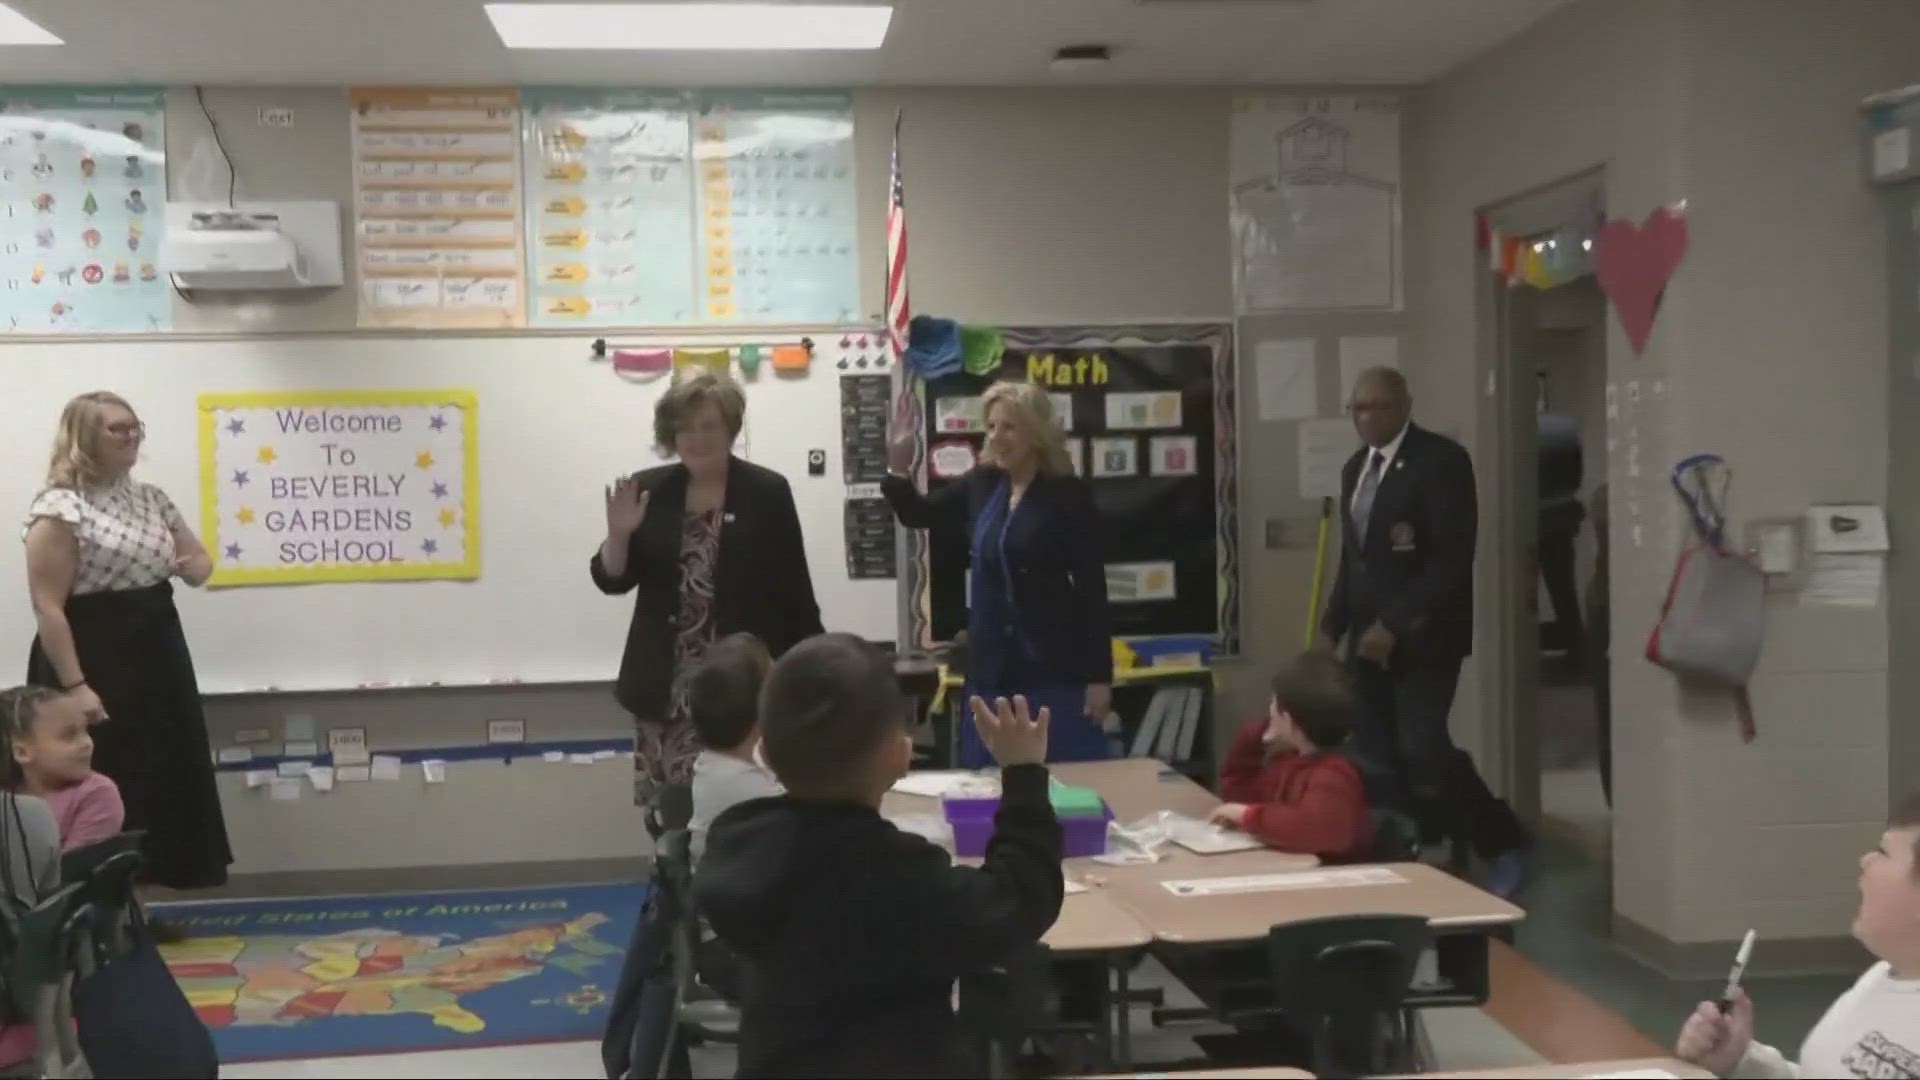 The First Lady toured a Purple Star Elementary School that supports military connected children.